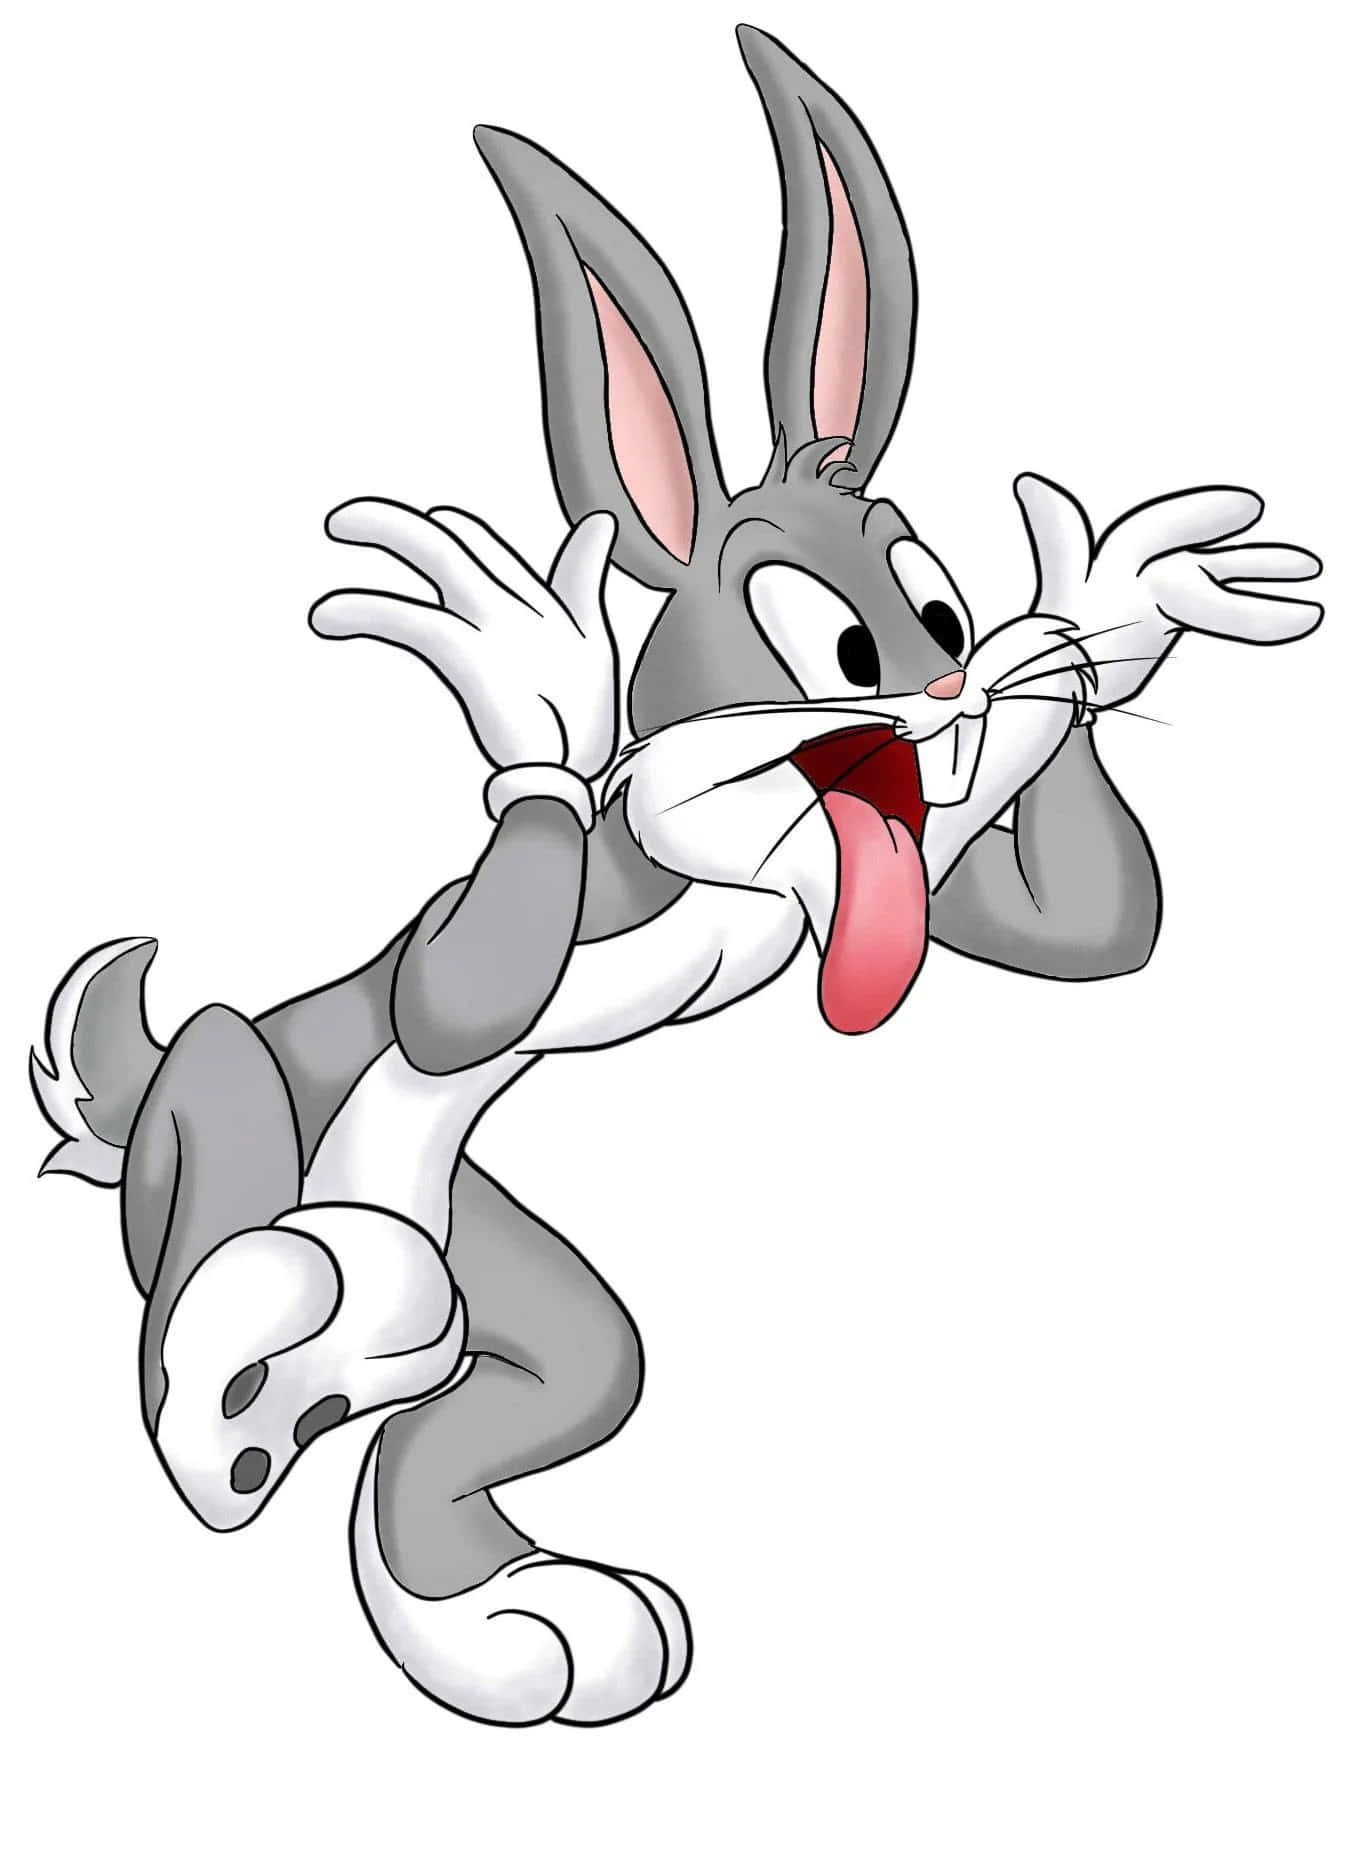 Get ready for the wild adventures of Bugs Bunny!